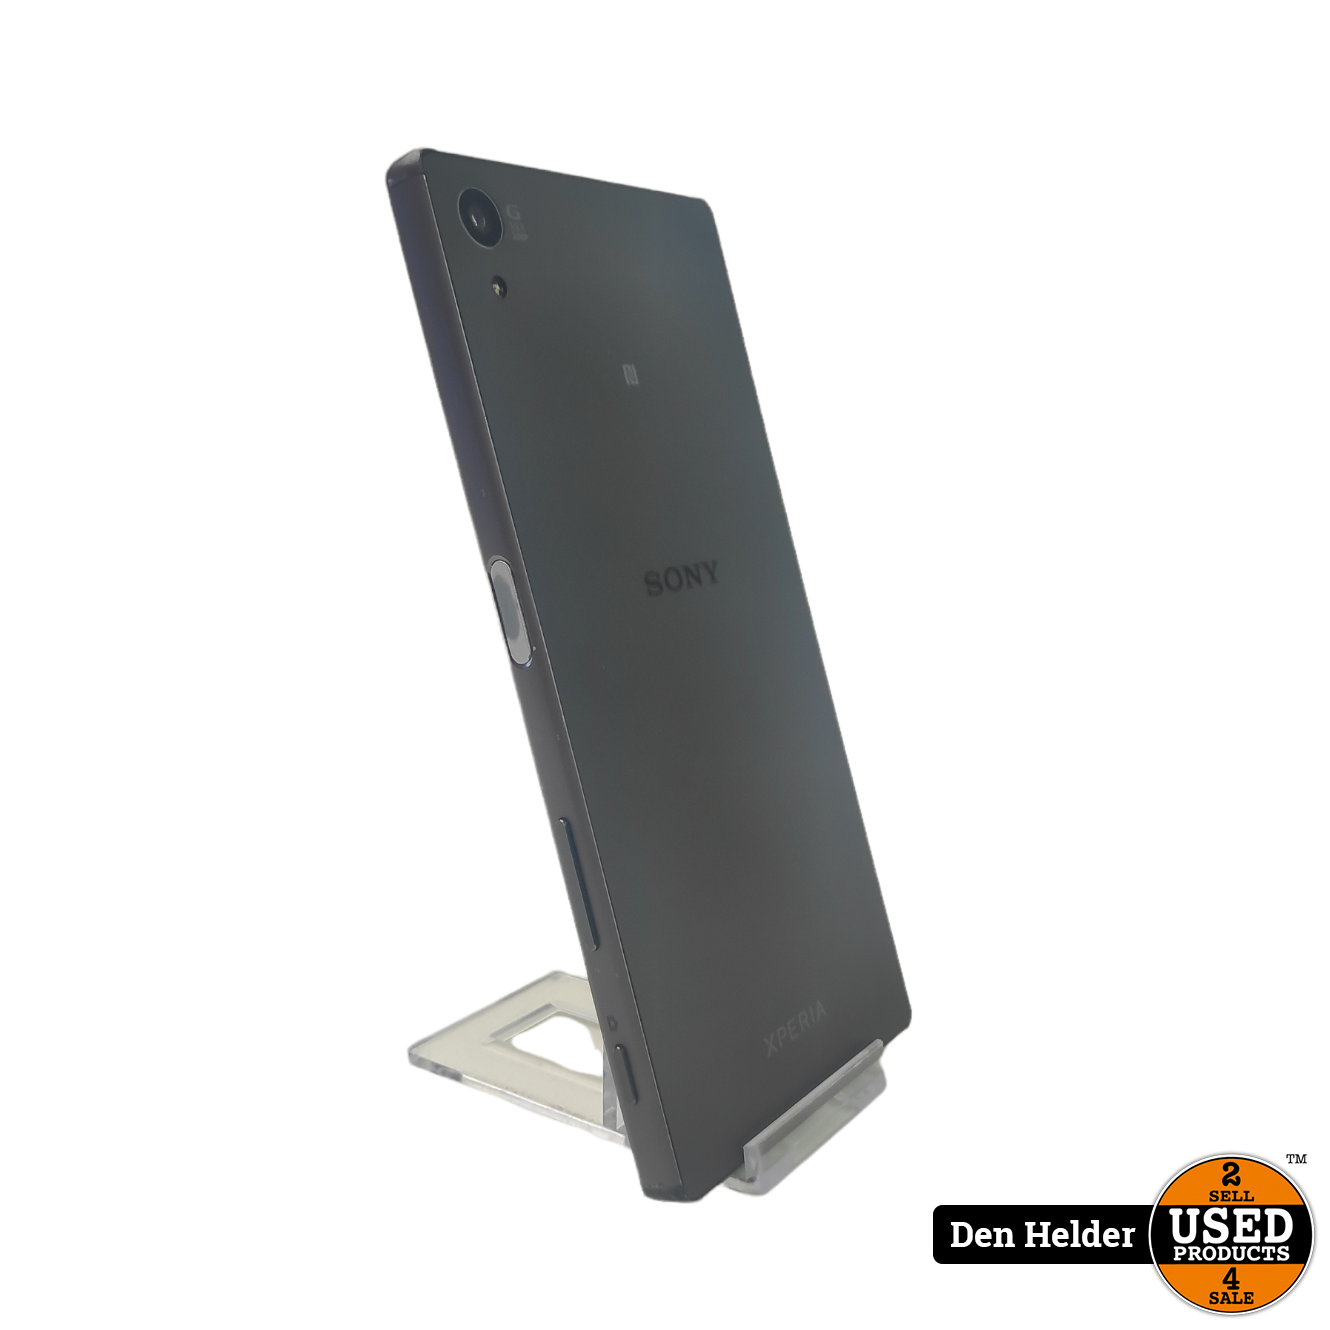 zondag zak Weinig Sony Xperia Z5 32GB Android 7 - In Goede Staat - Used Products Den Helder